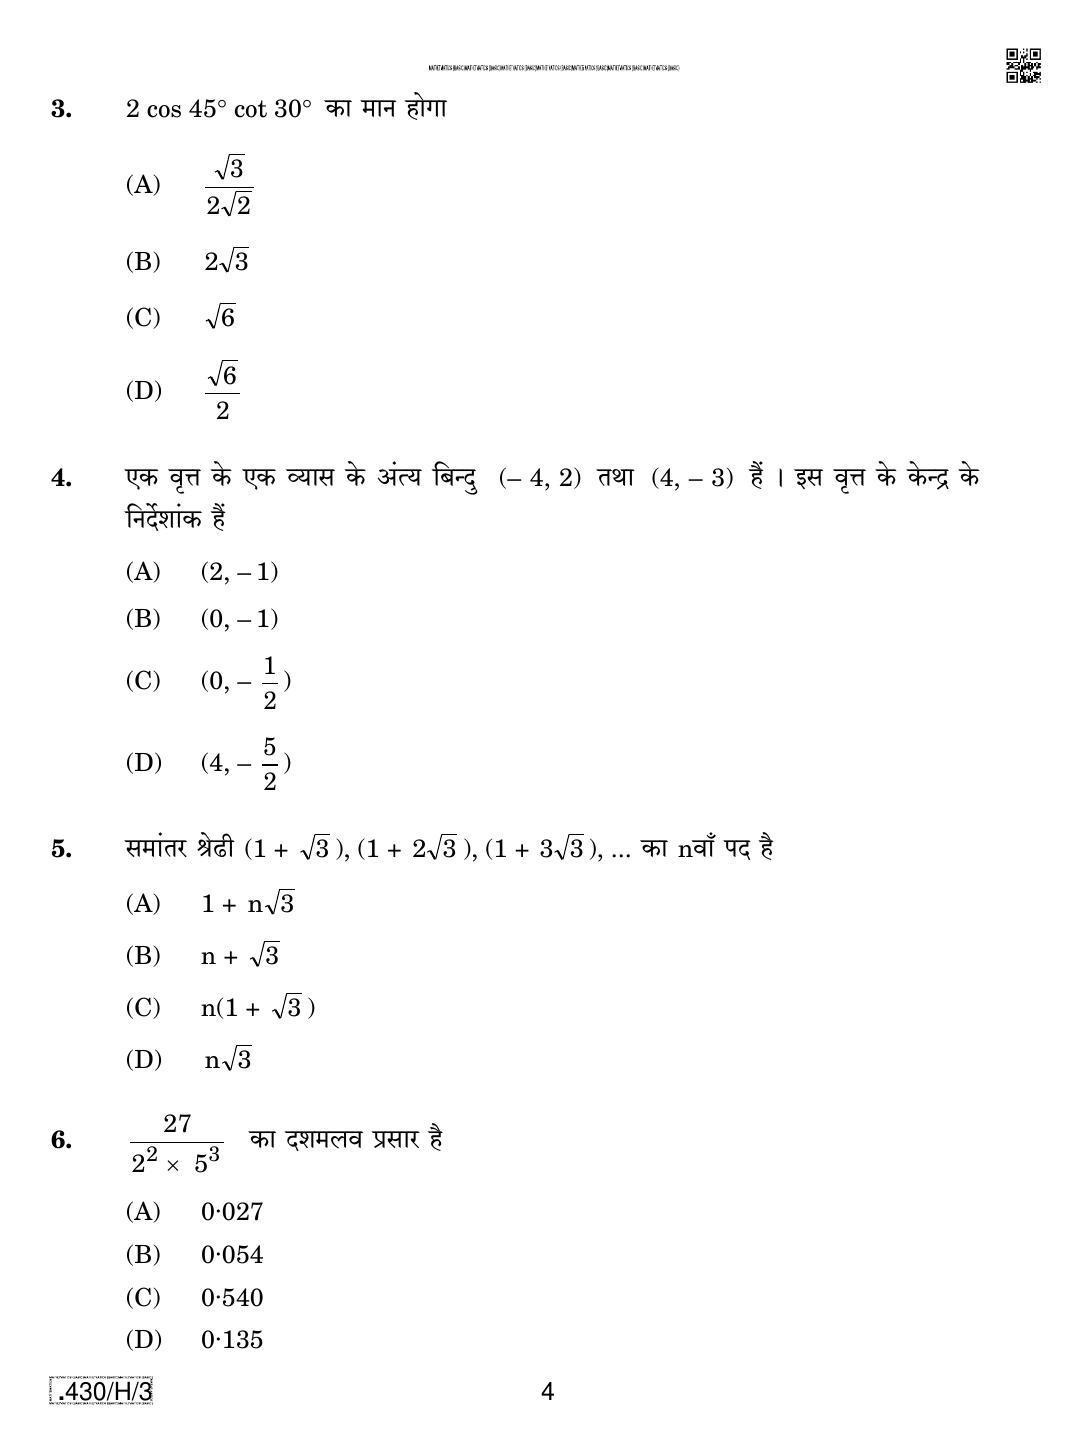 CBSE Class 10 430-C-3 - Maths (Basic) 2020 Compartment Question Paper - Page 4